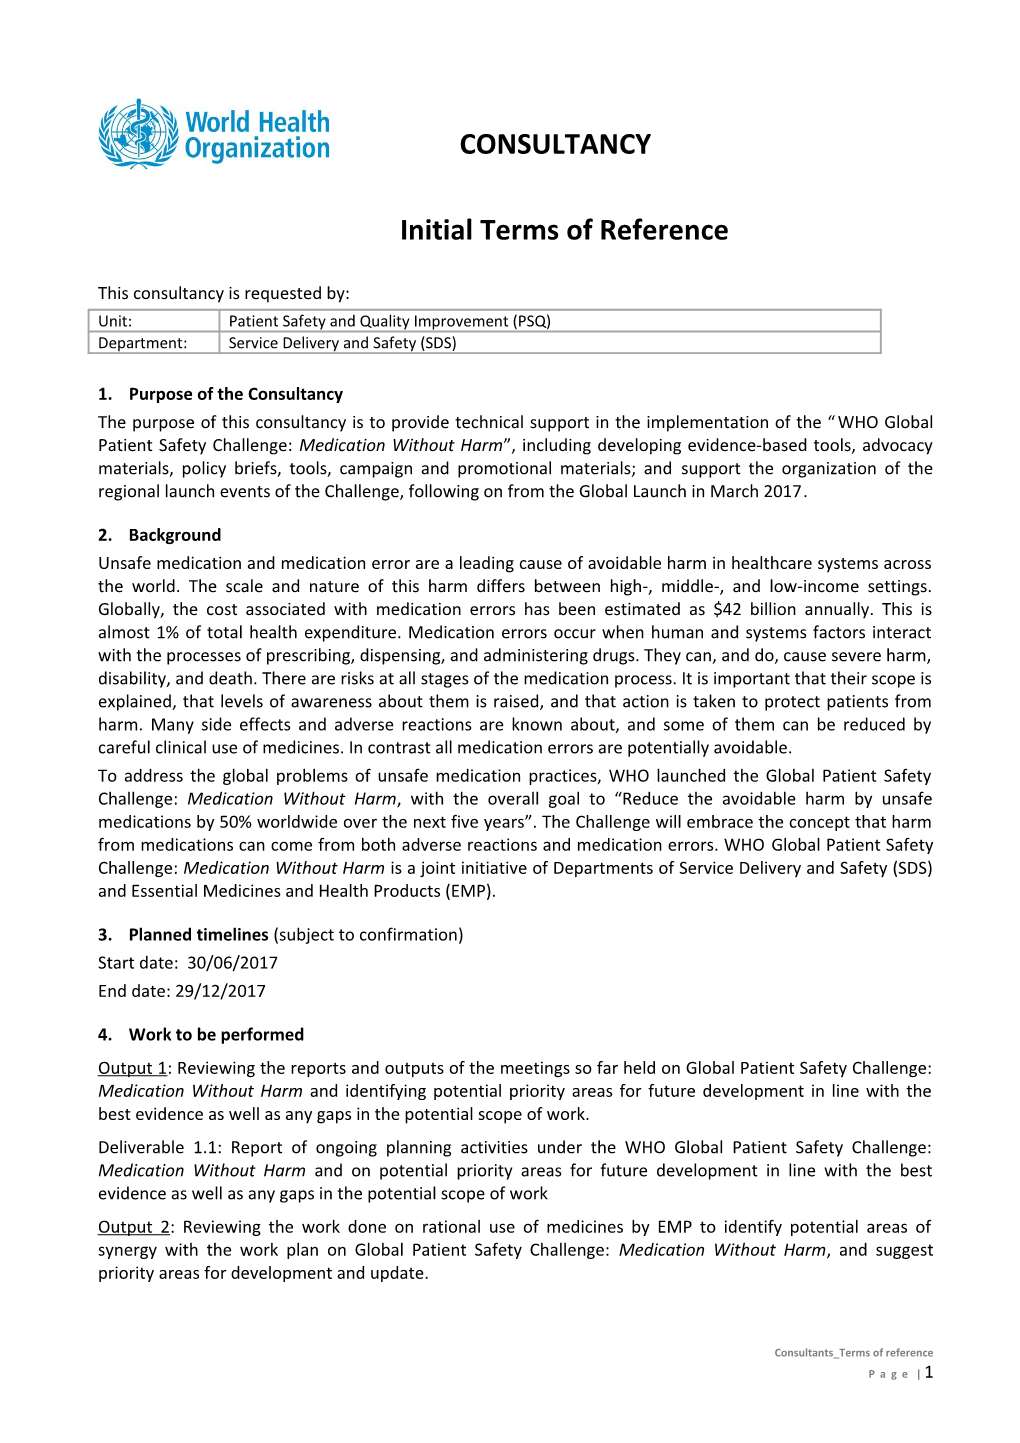 Initial Terms of Reference